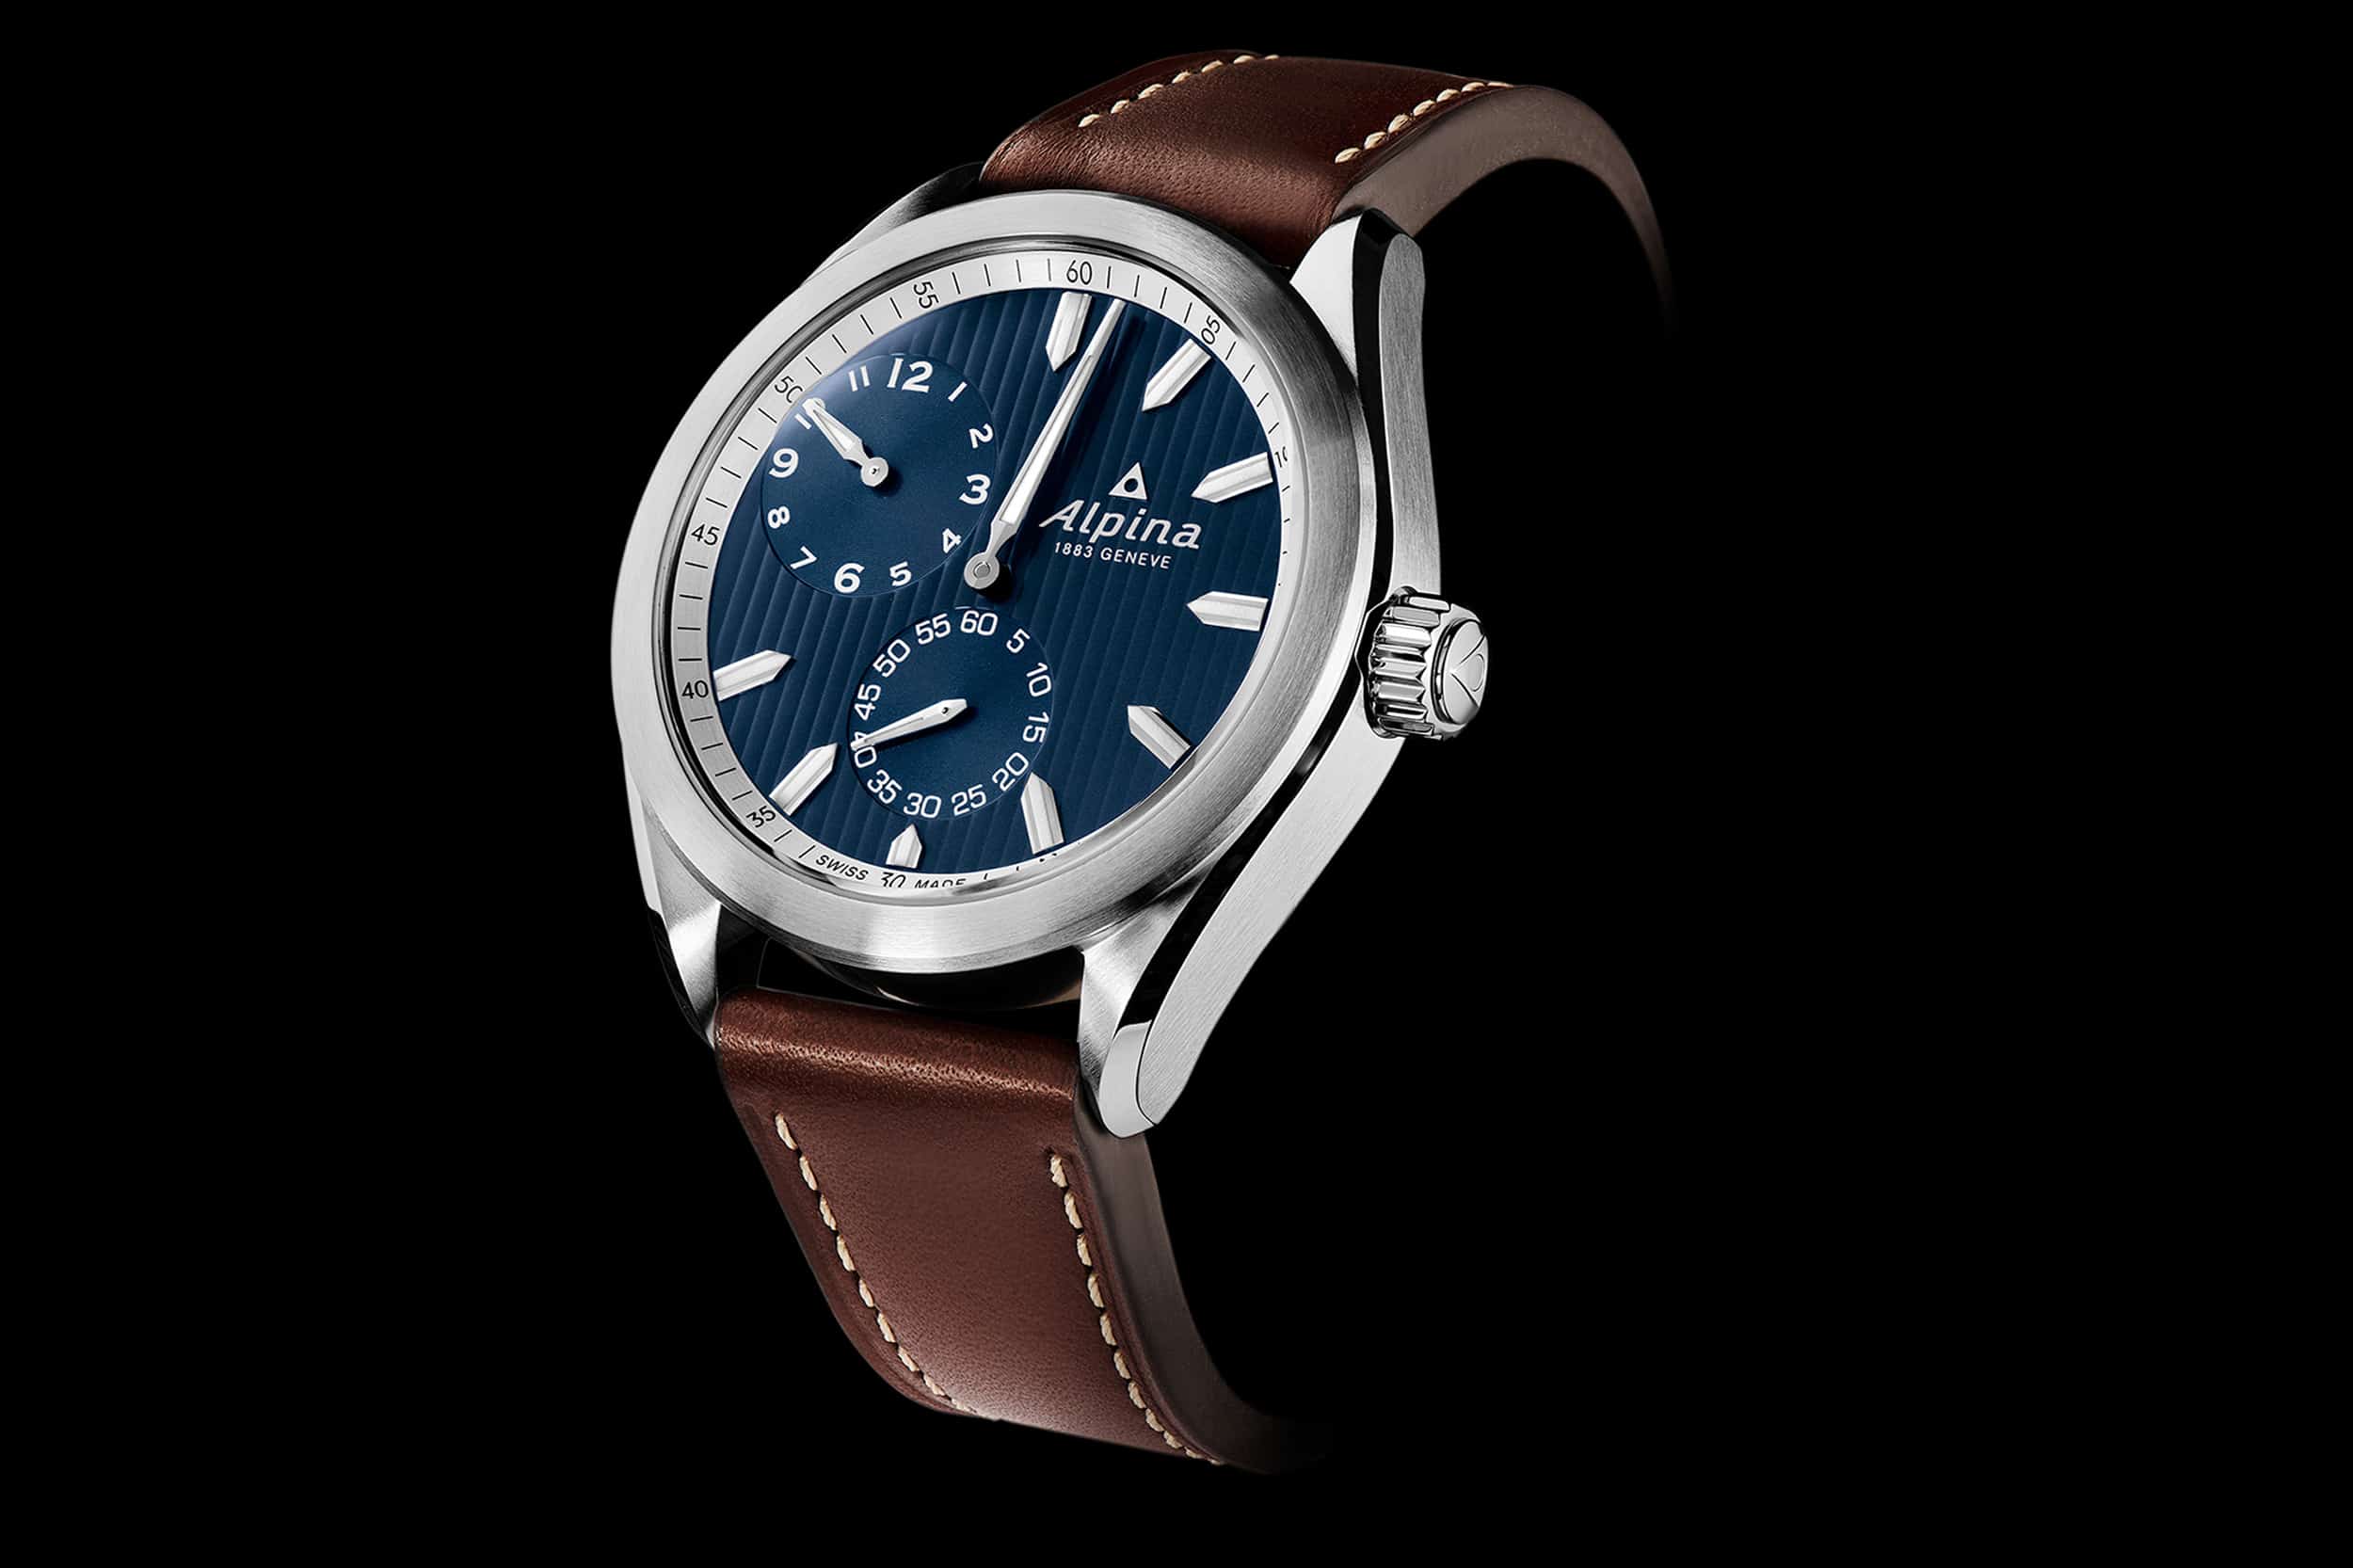 Alpina Introduces a New Sporty Take on the Classic Regulator - Worn & Wound